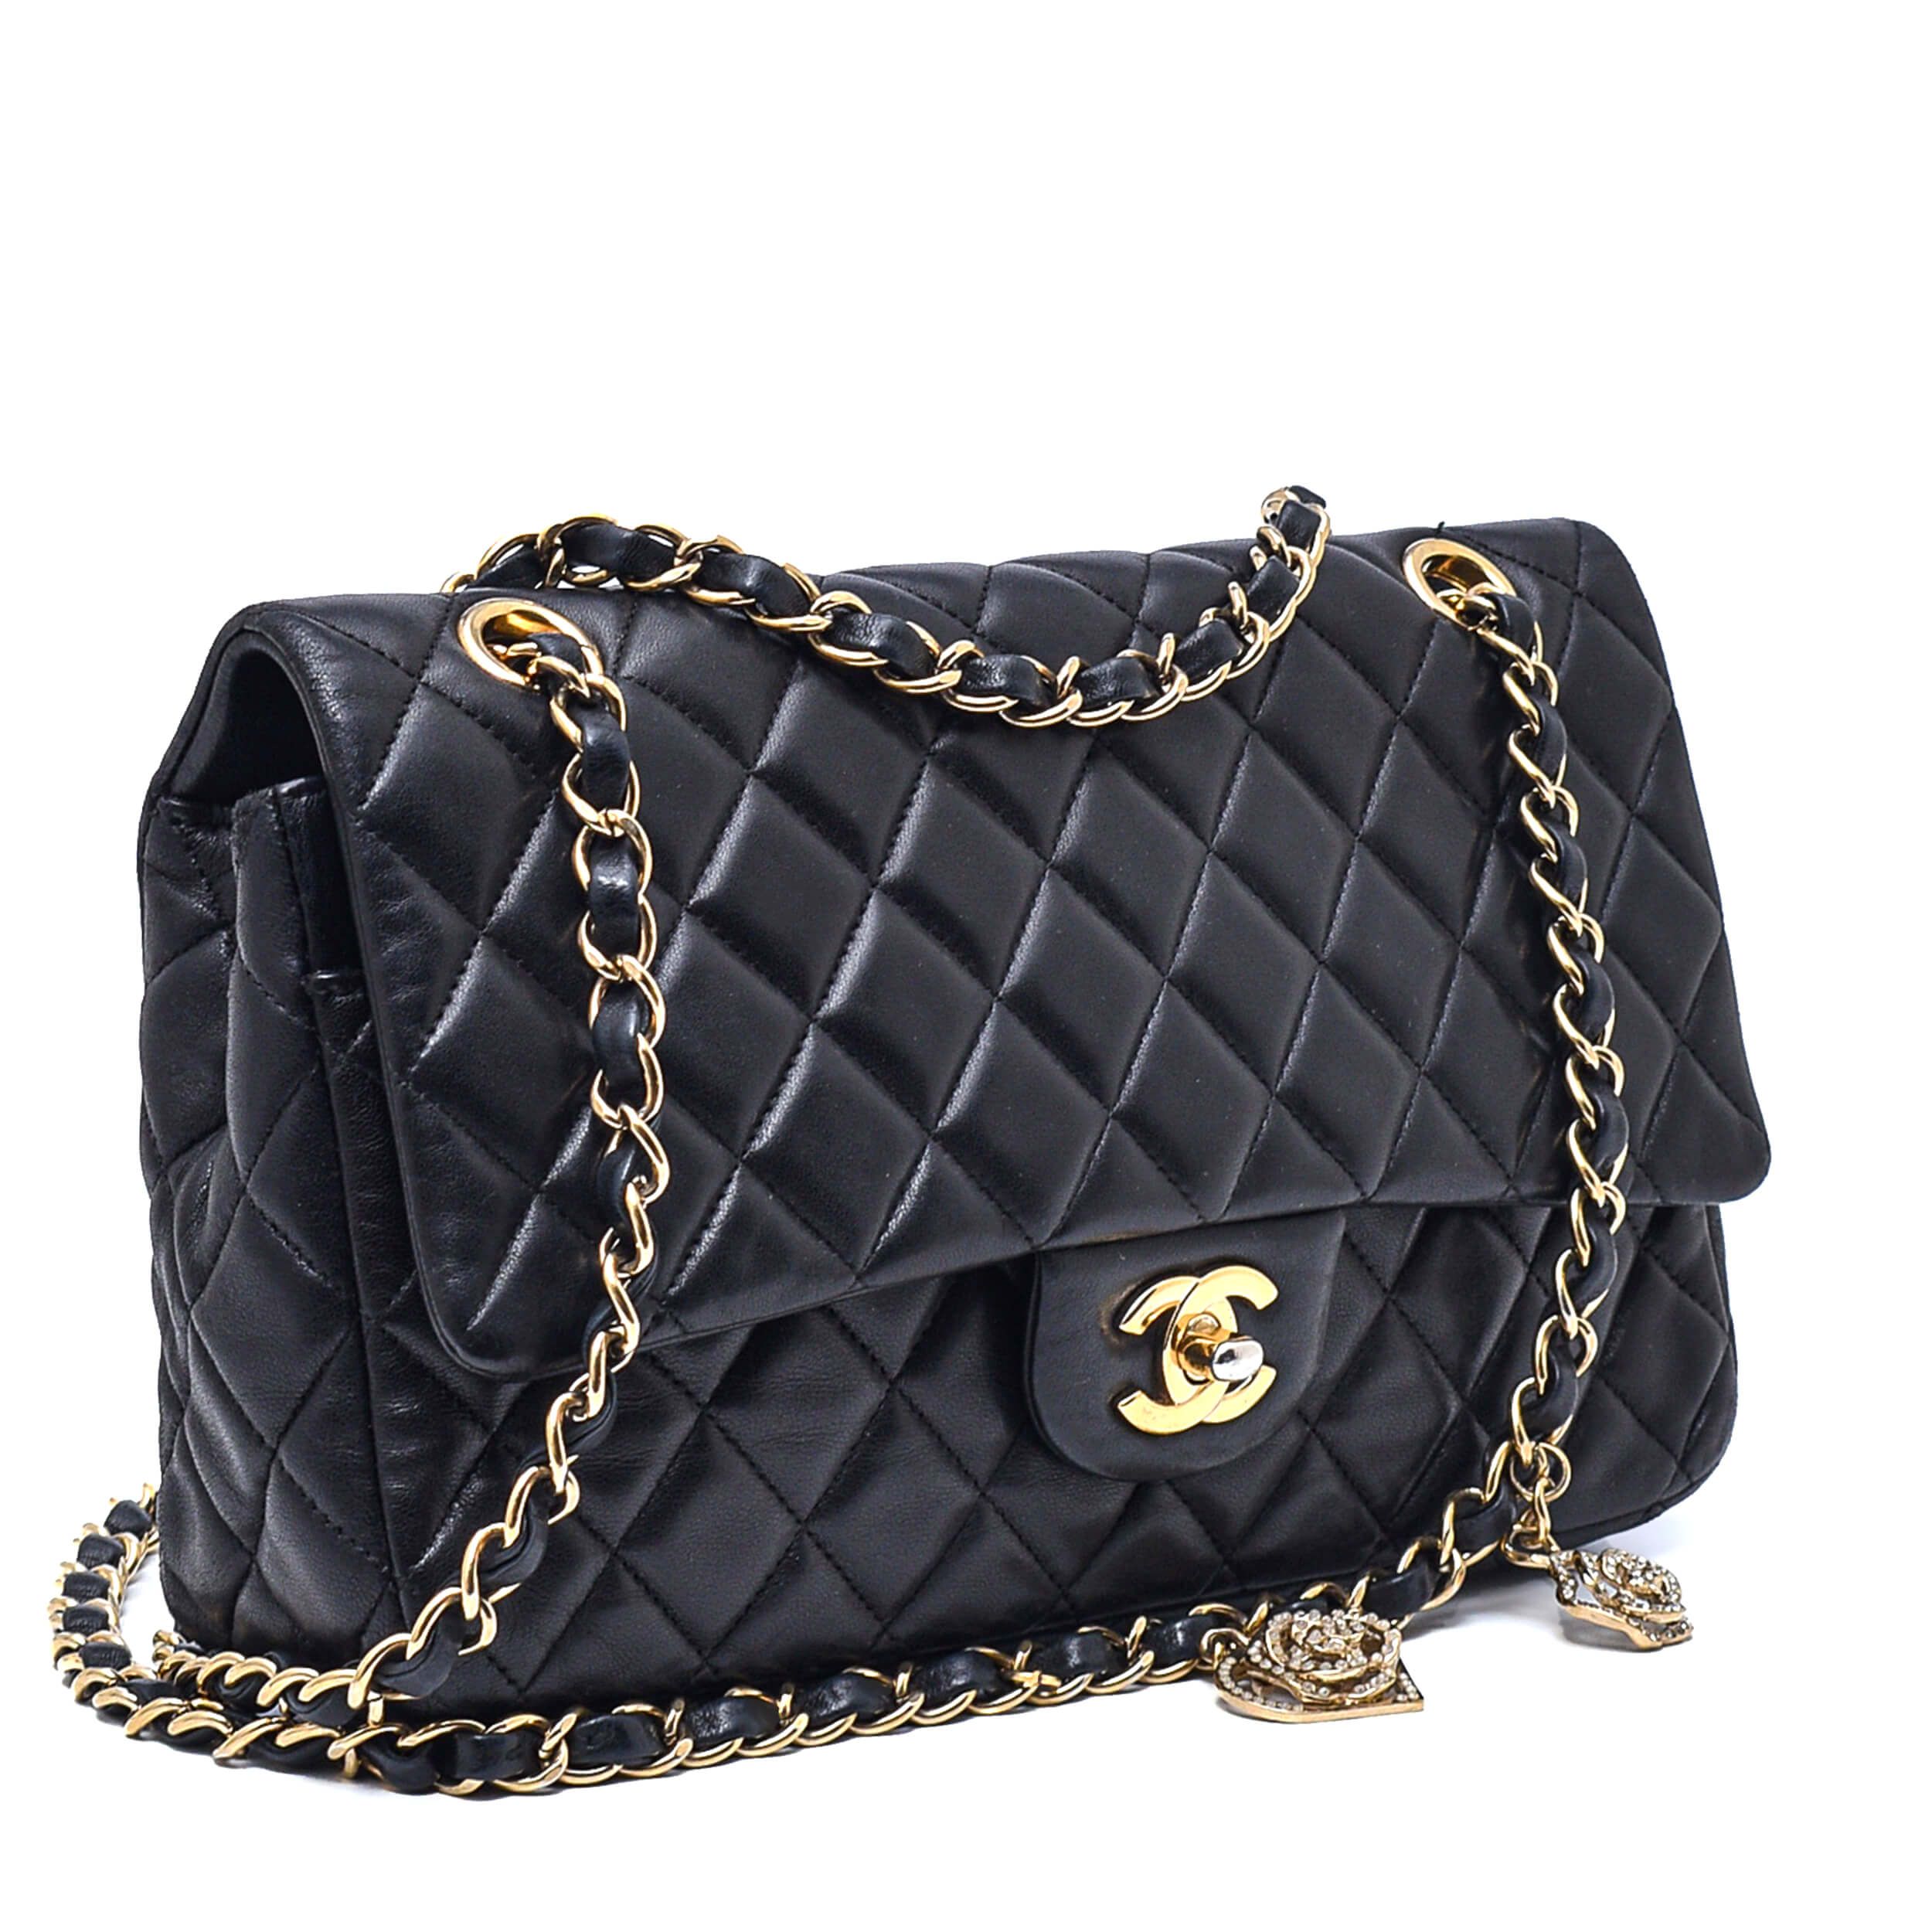 Chanel- Black Quilted Lambskin Leather Camelia Charm Single Medium Flap Bag